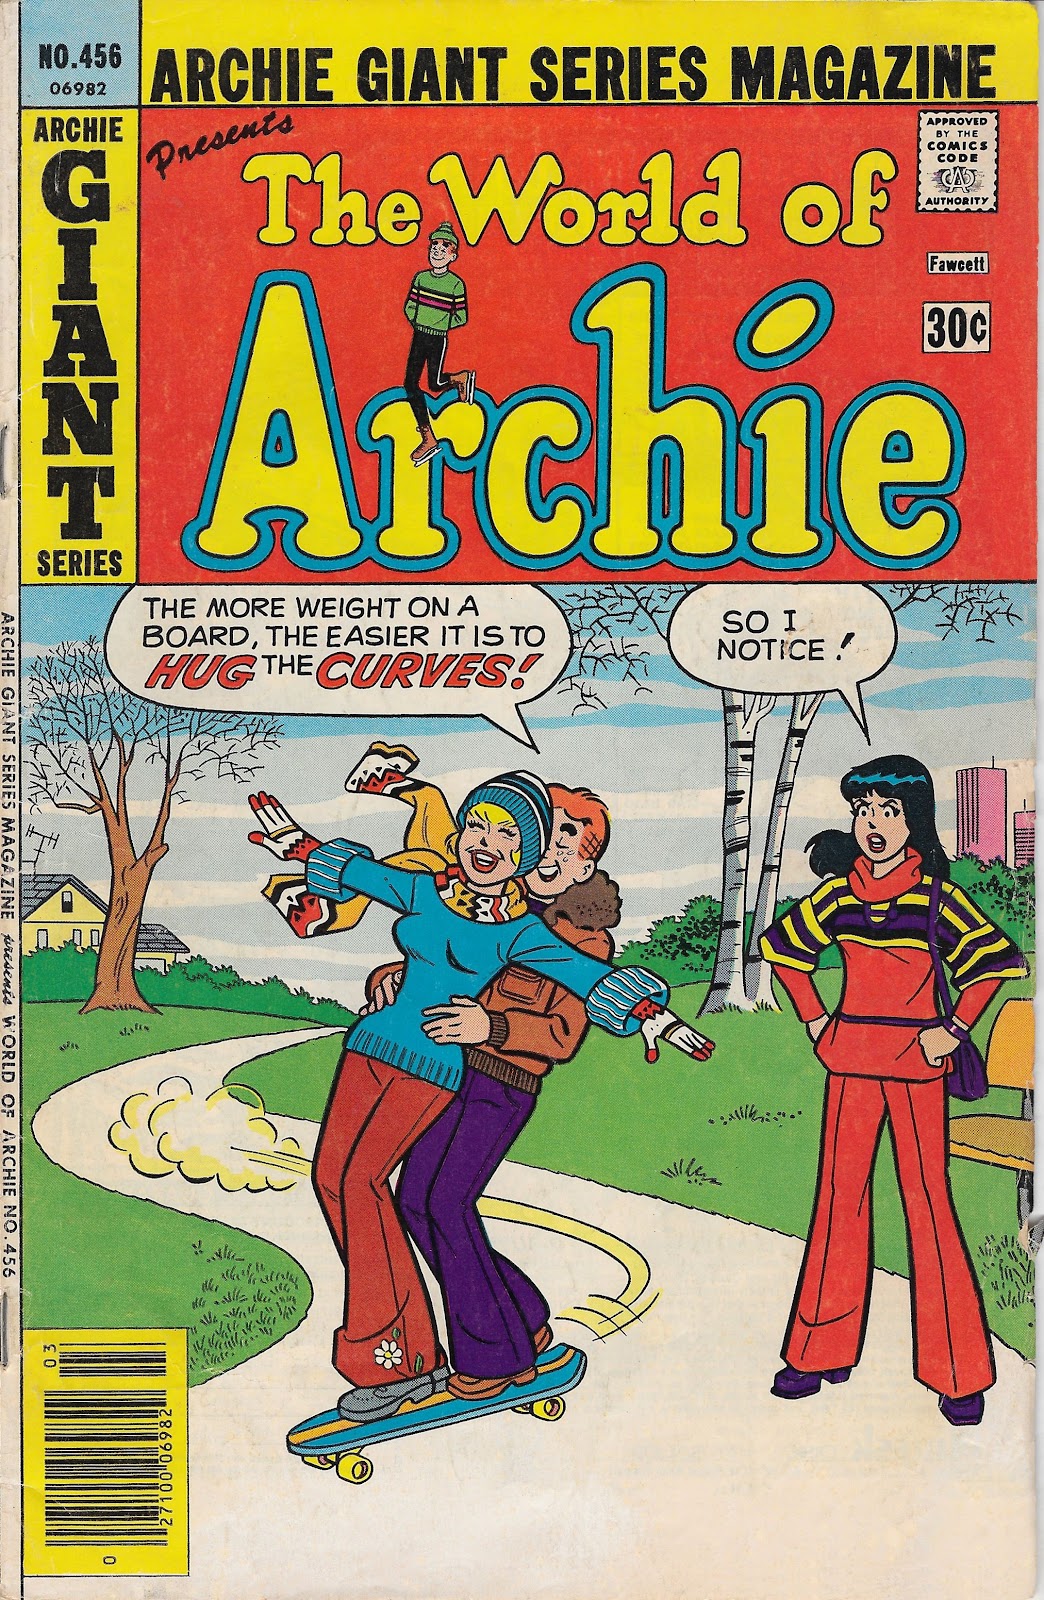 Archie Giant Series Magazine issue 456 - Page 1